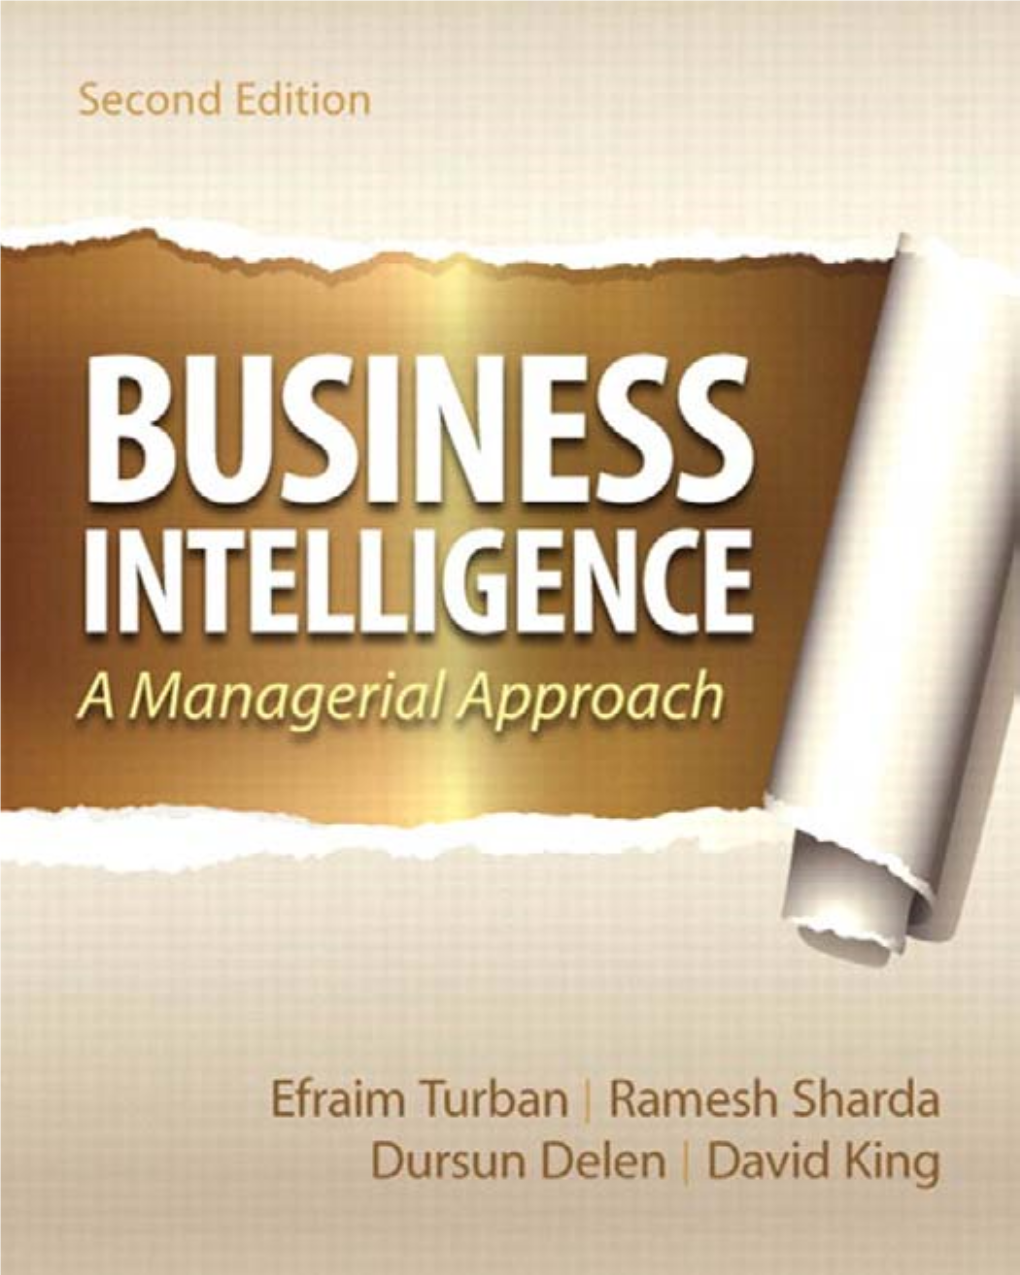 Business Intelligence: a Managerial Approach.Pdf